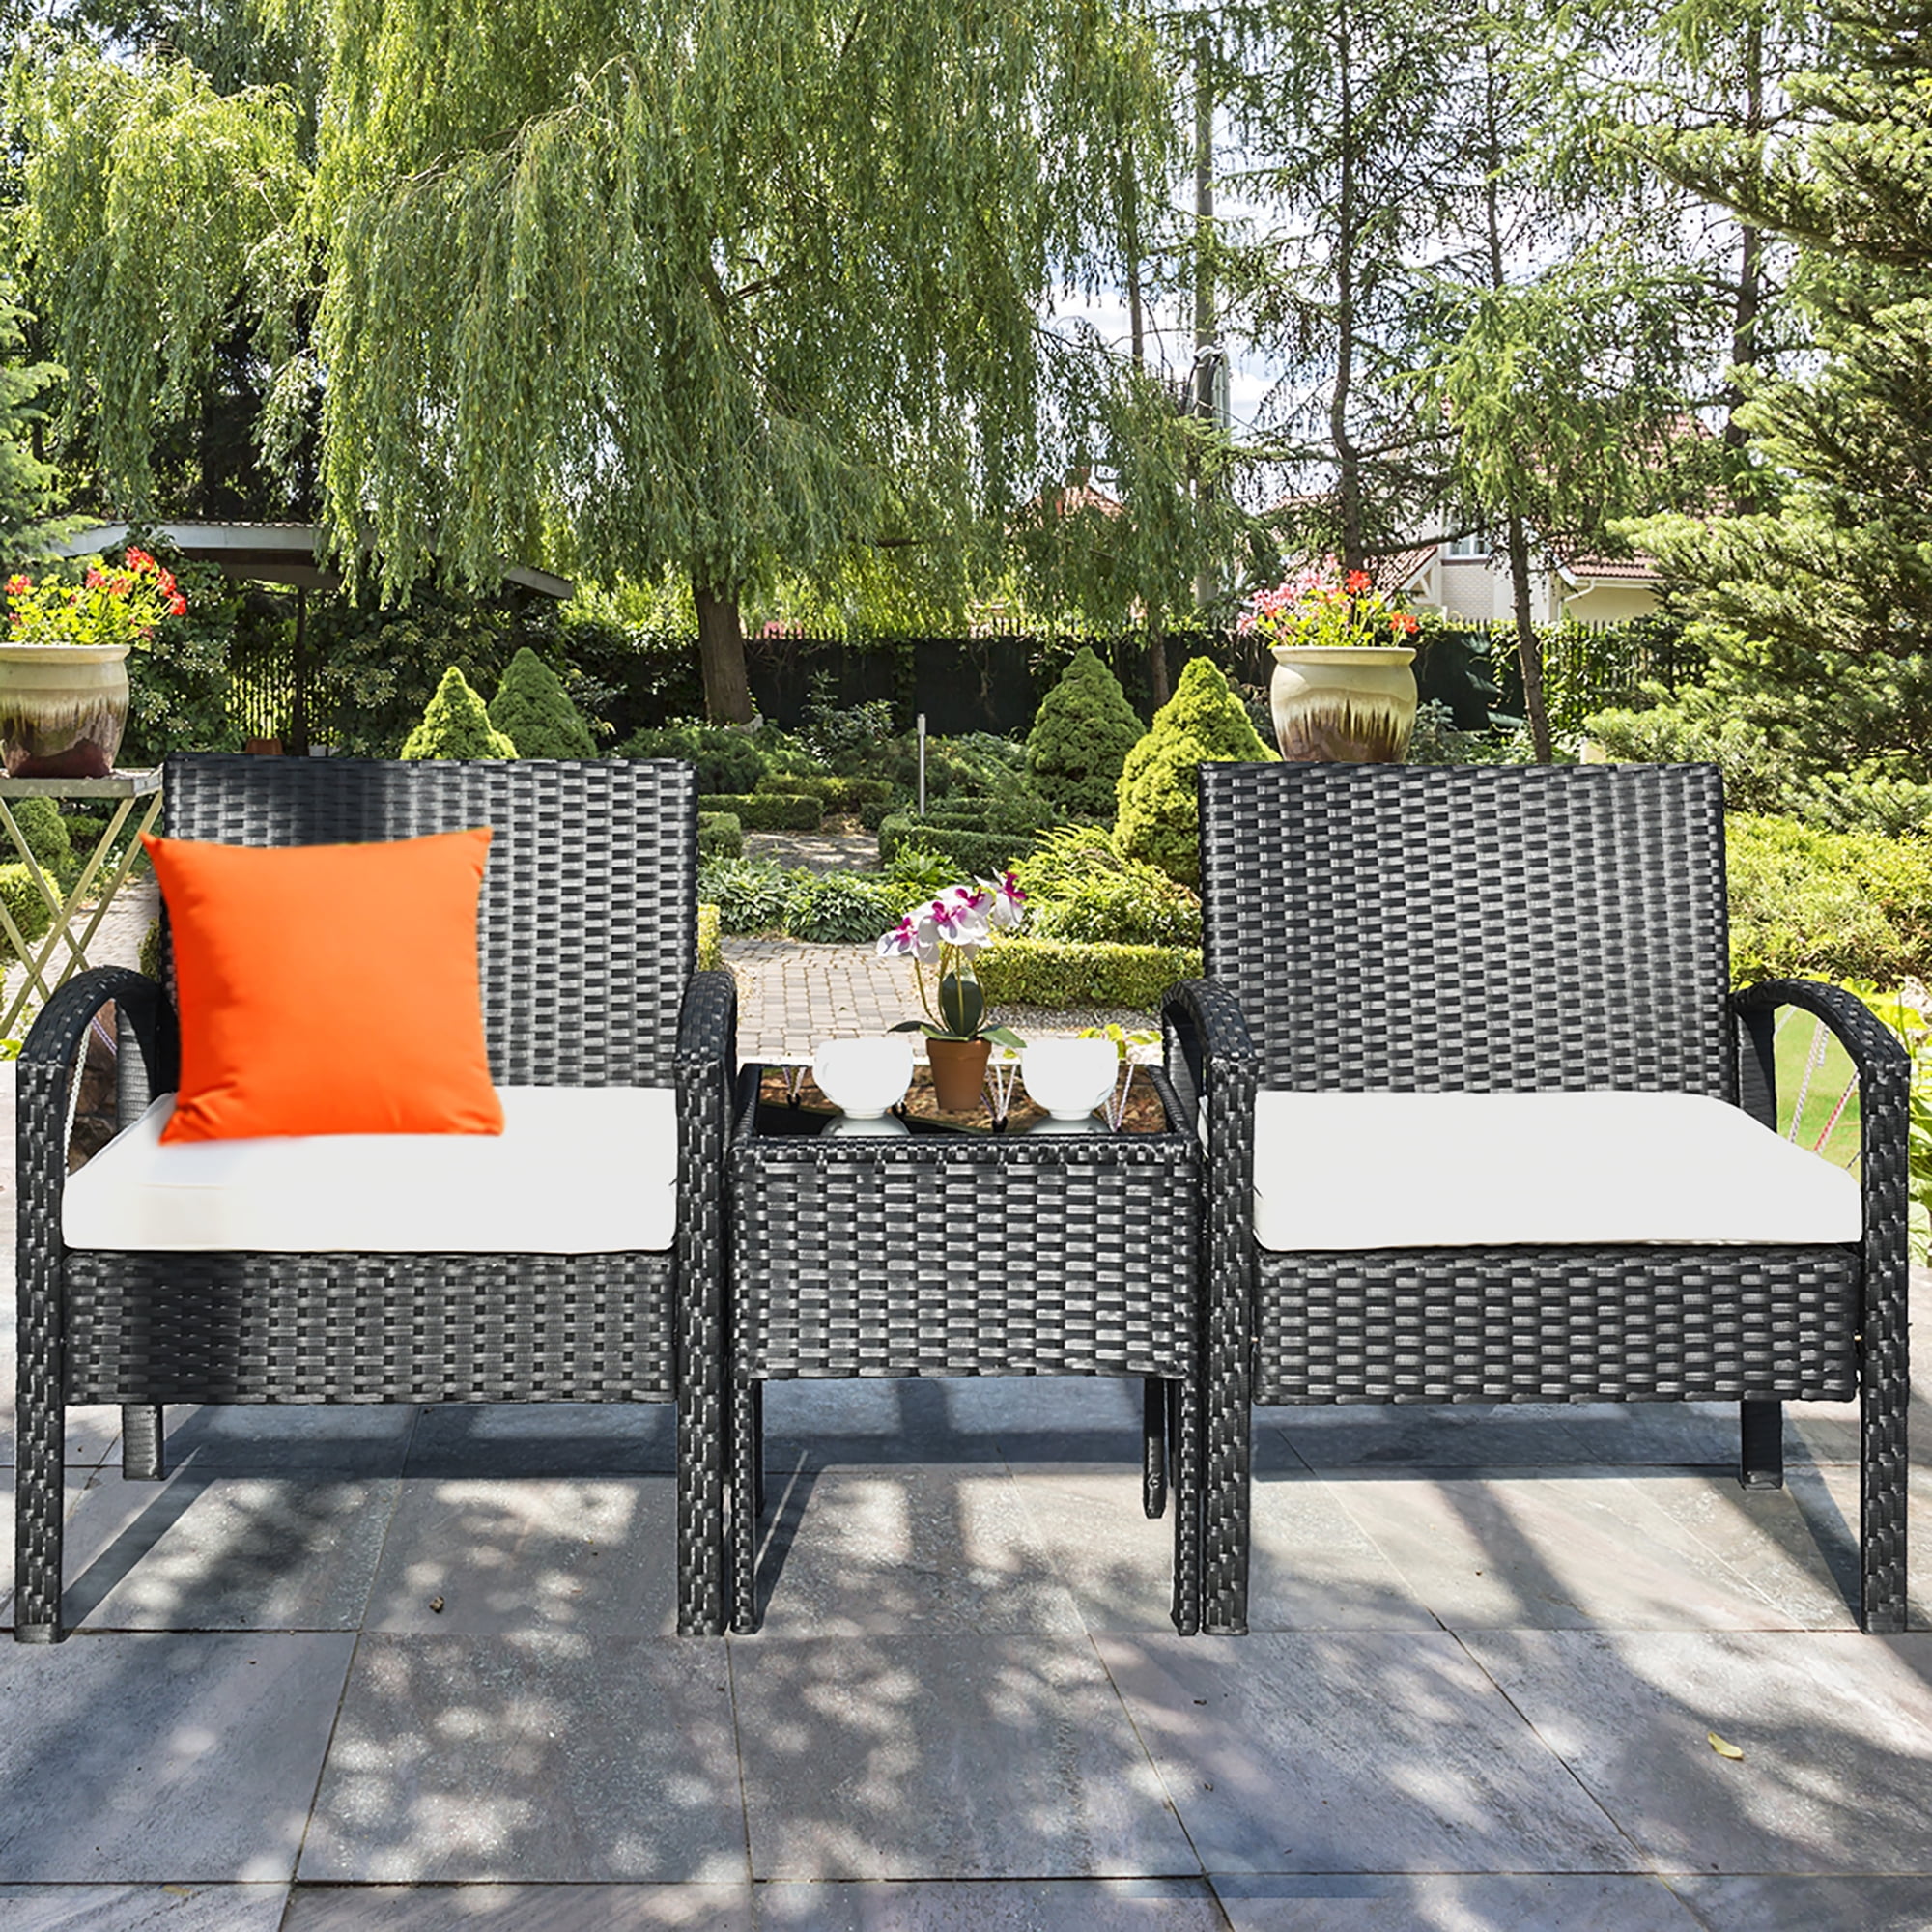 Details about   3Pcs Patio Furniture Set Outdoor Wicker Sofas Rattan Chair Table Flat Chair Set 